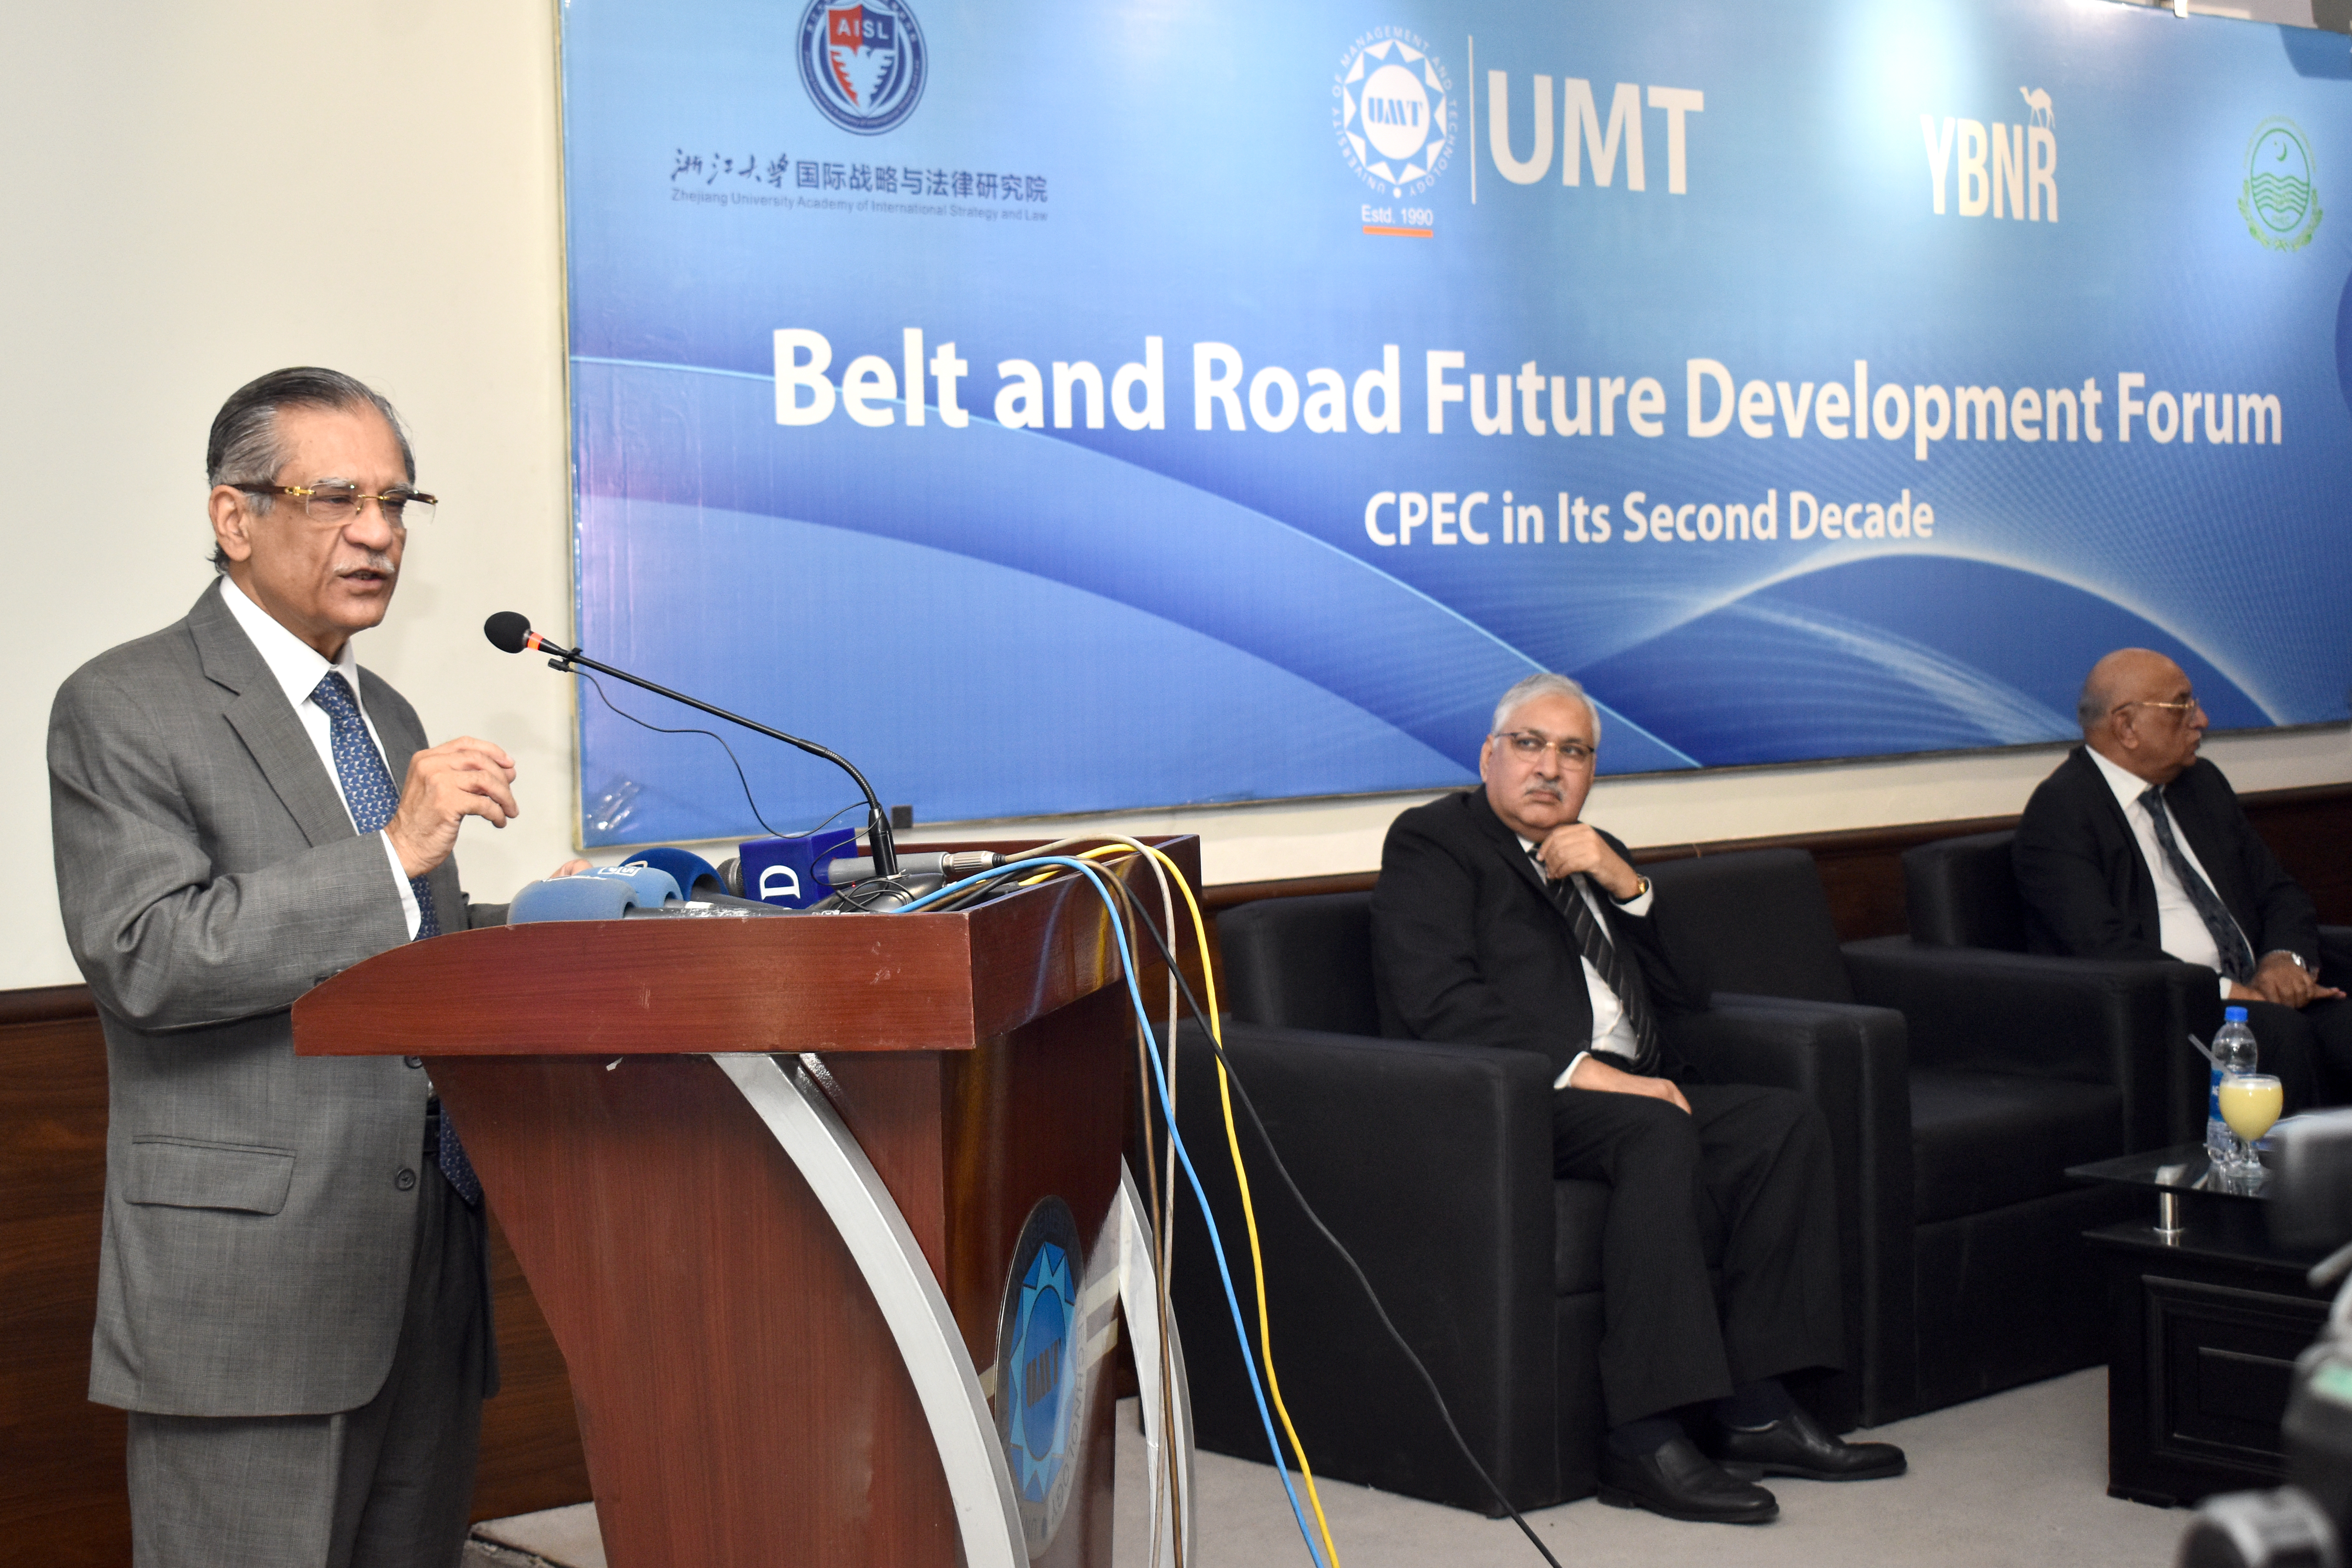 Belt and Road Future Development Forum CPEC in Its Second Decade